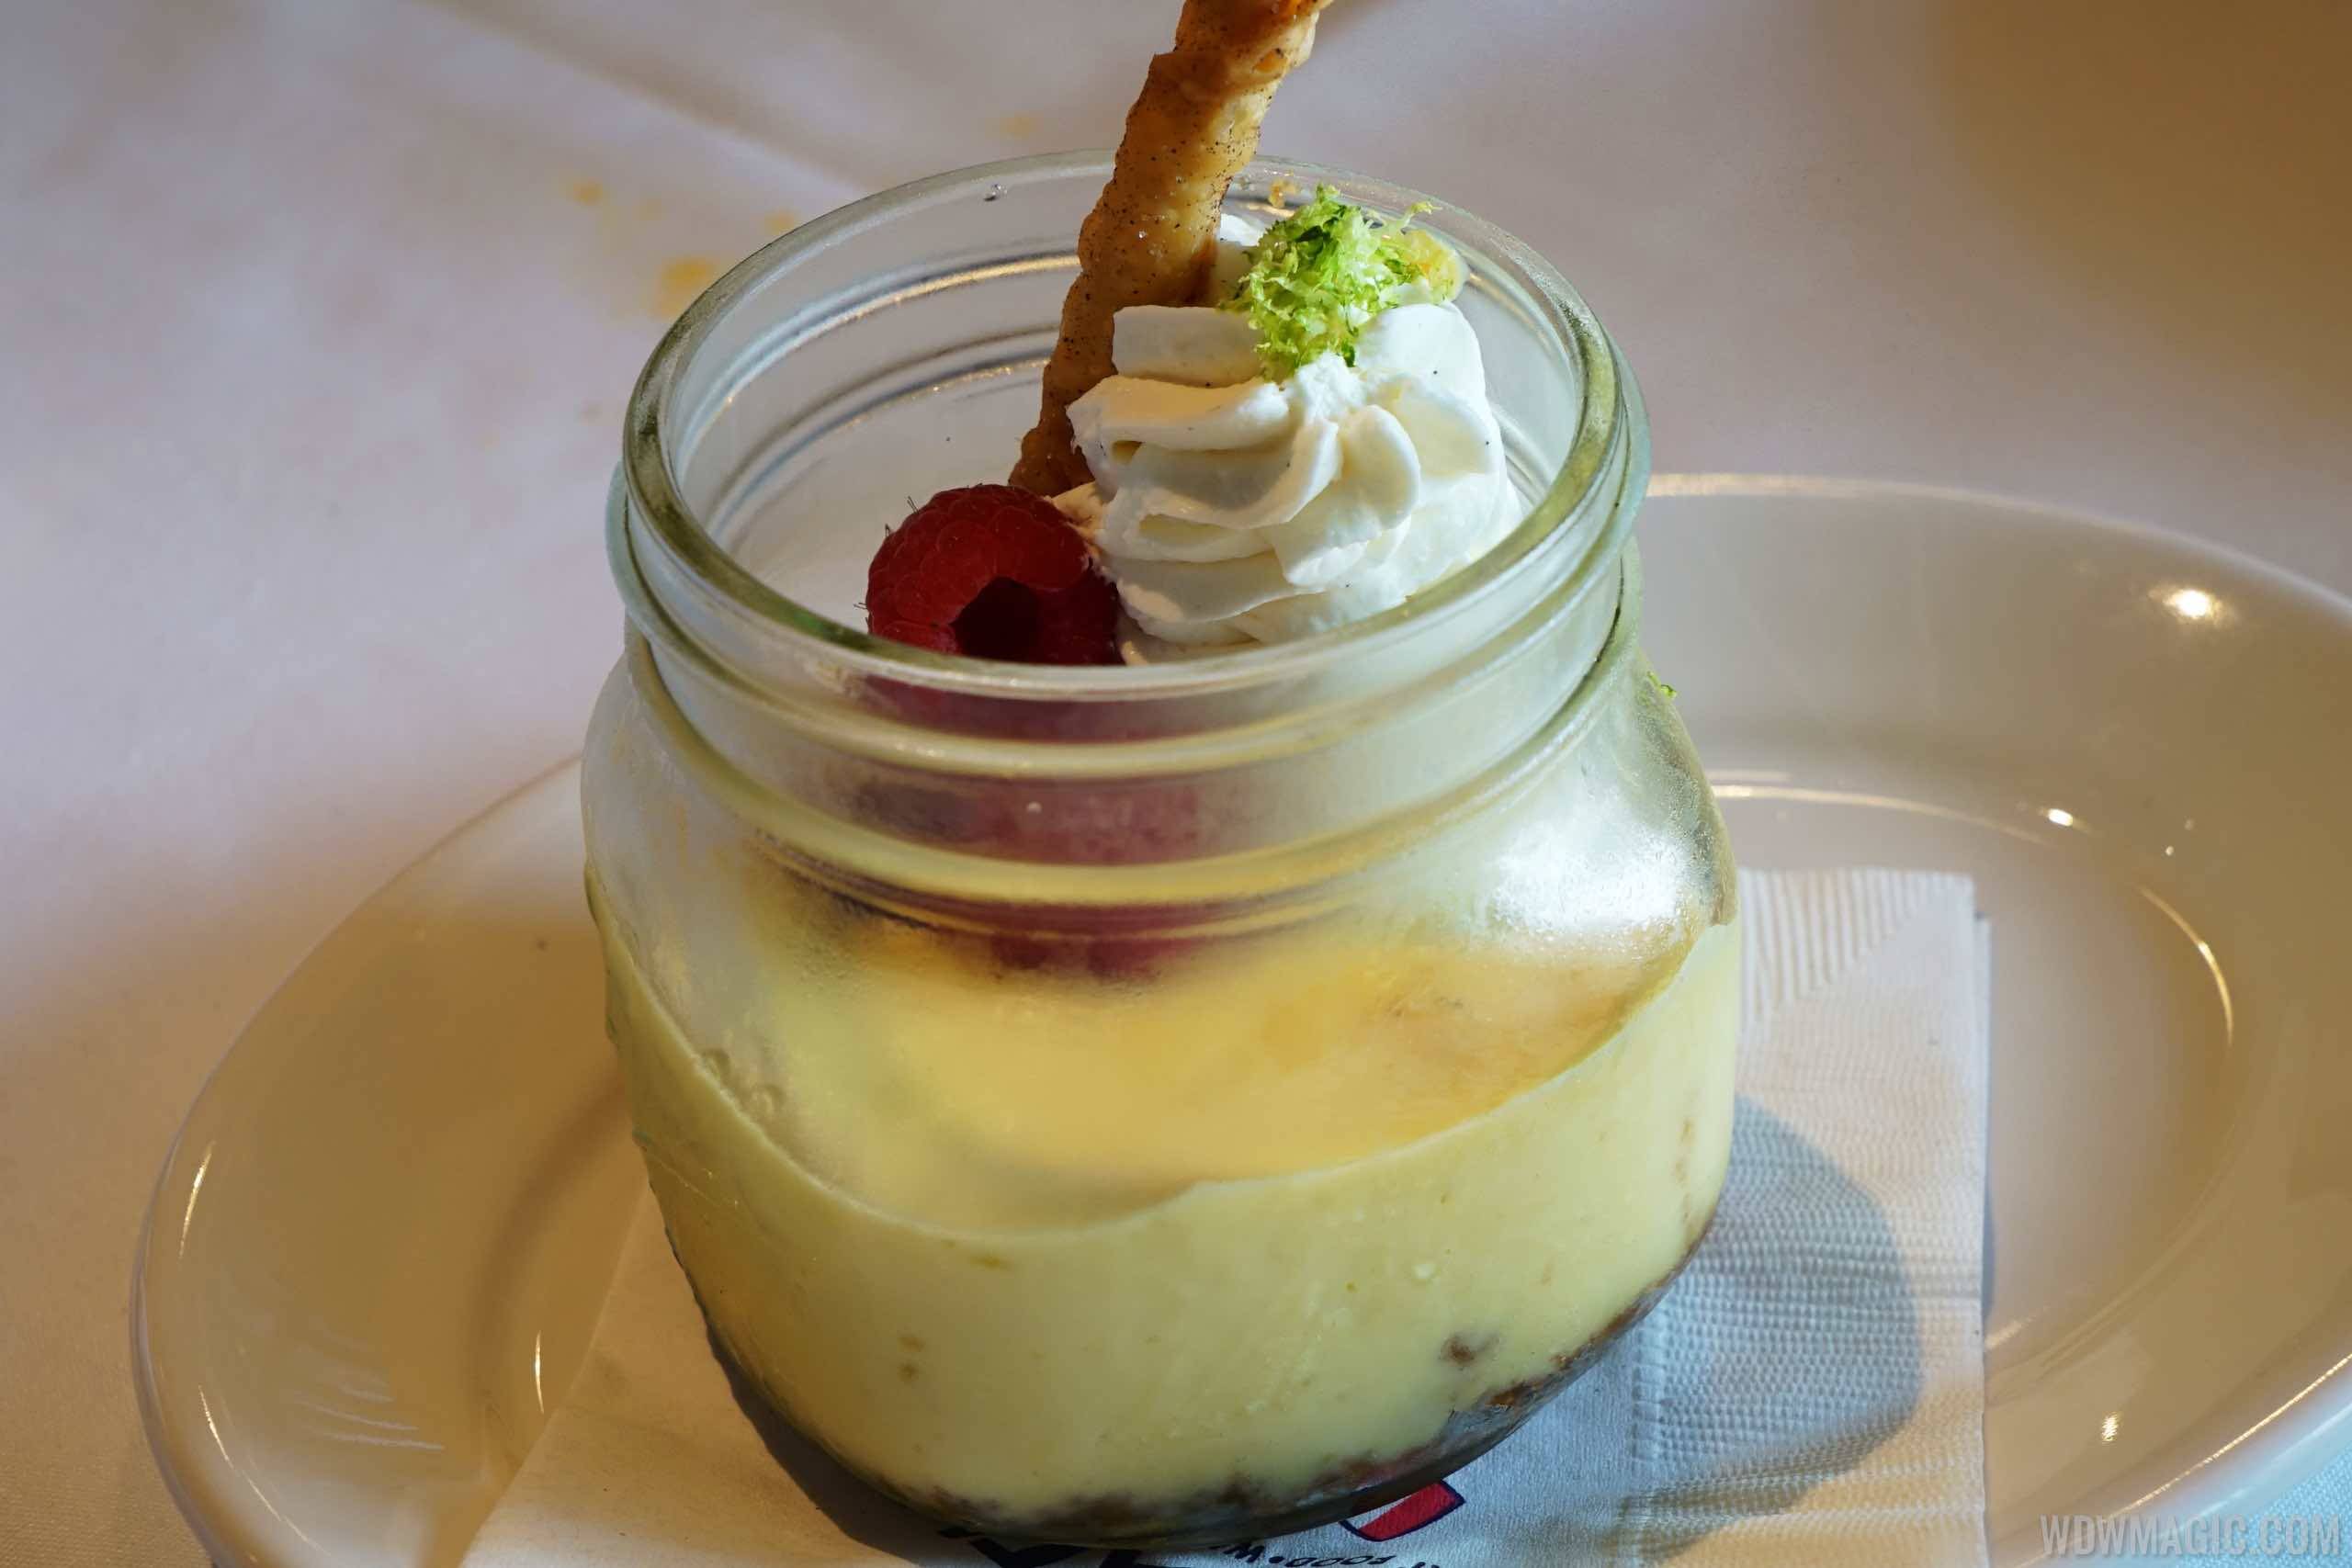 The BOATHOUSE Food - Key Lime Pie in a Jar